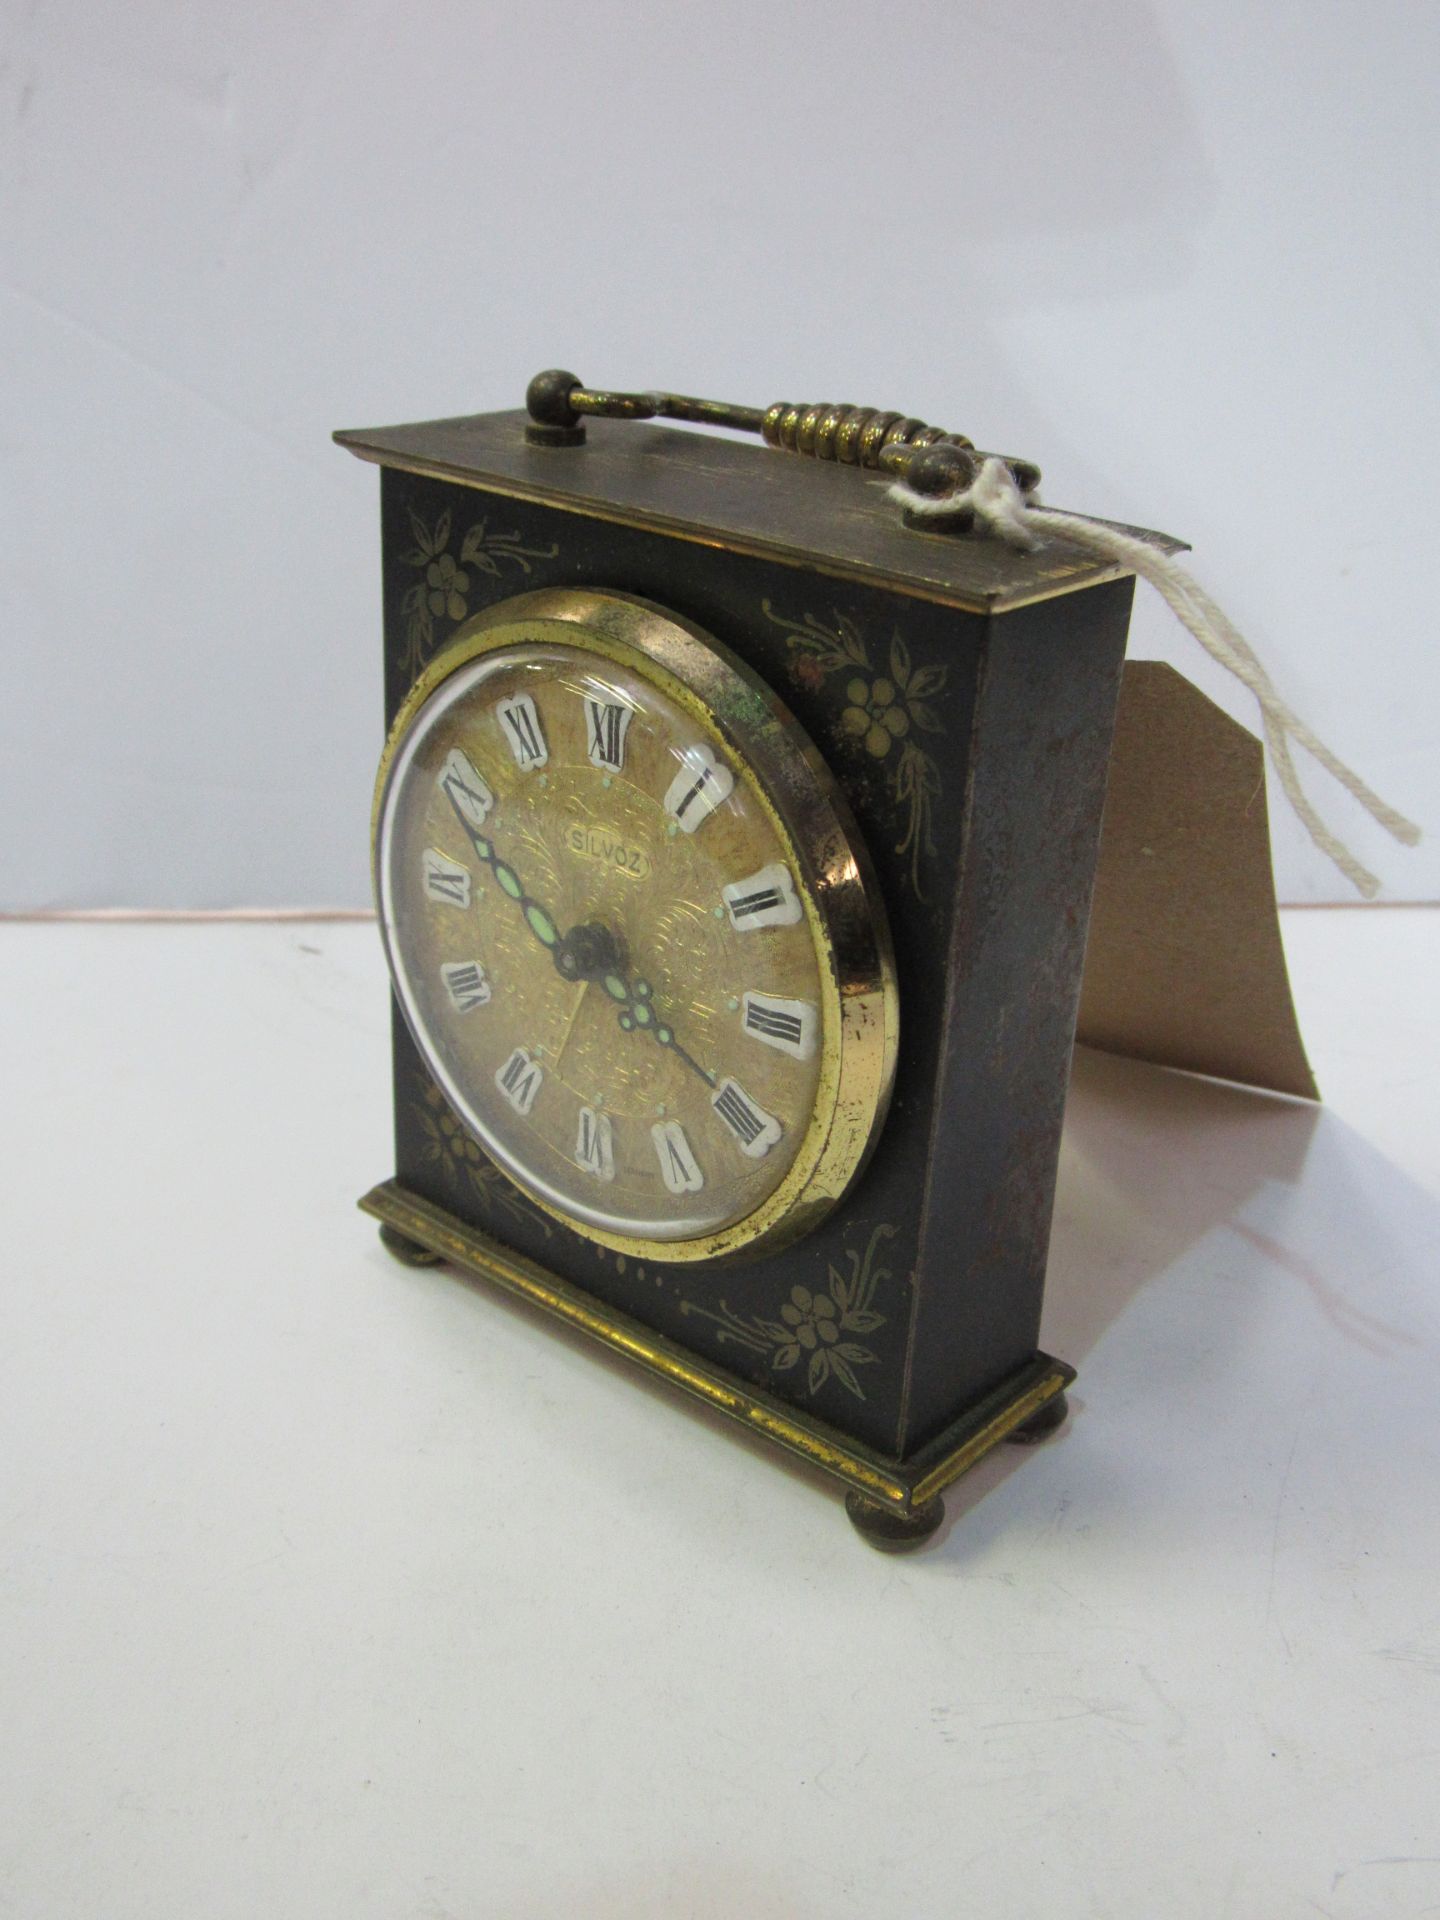 Miniature mantel clock with alarm by Silvoz, Germany. - Image 2 of 3